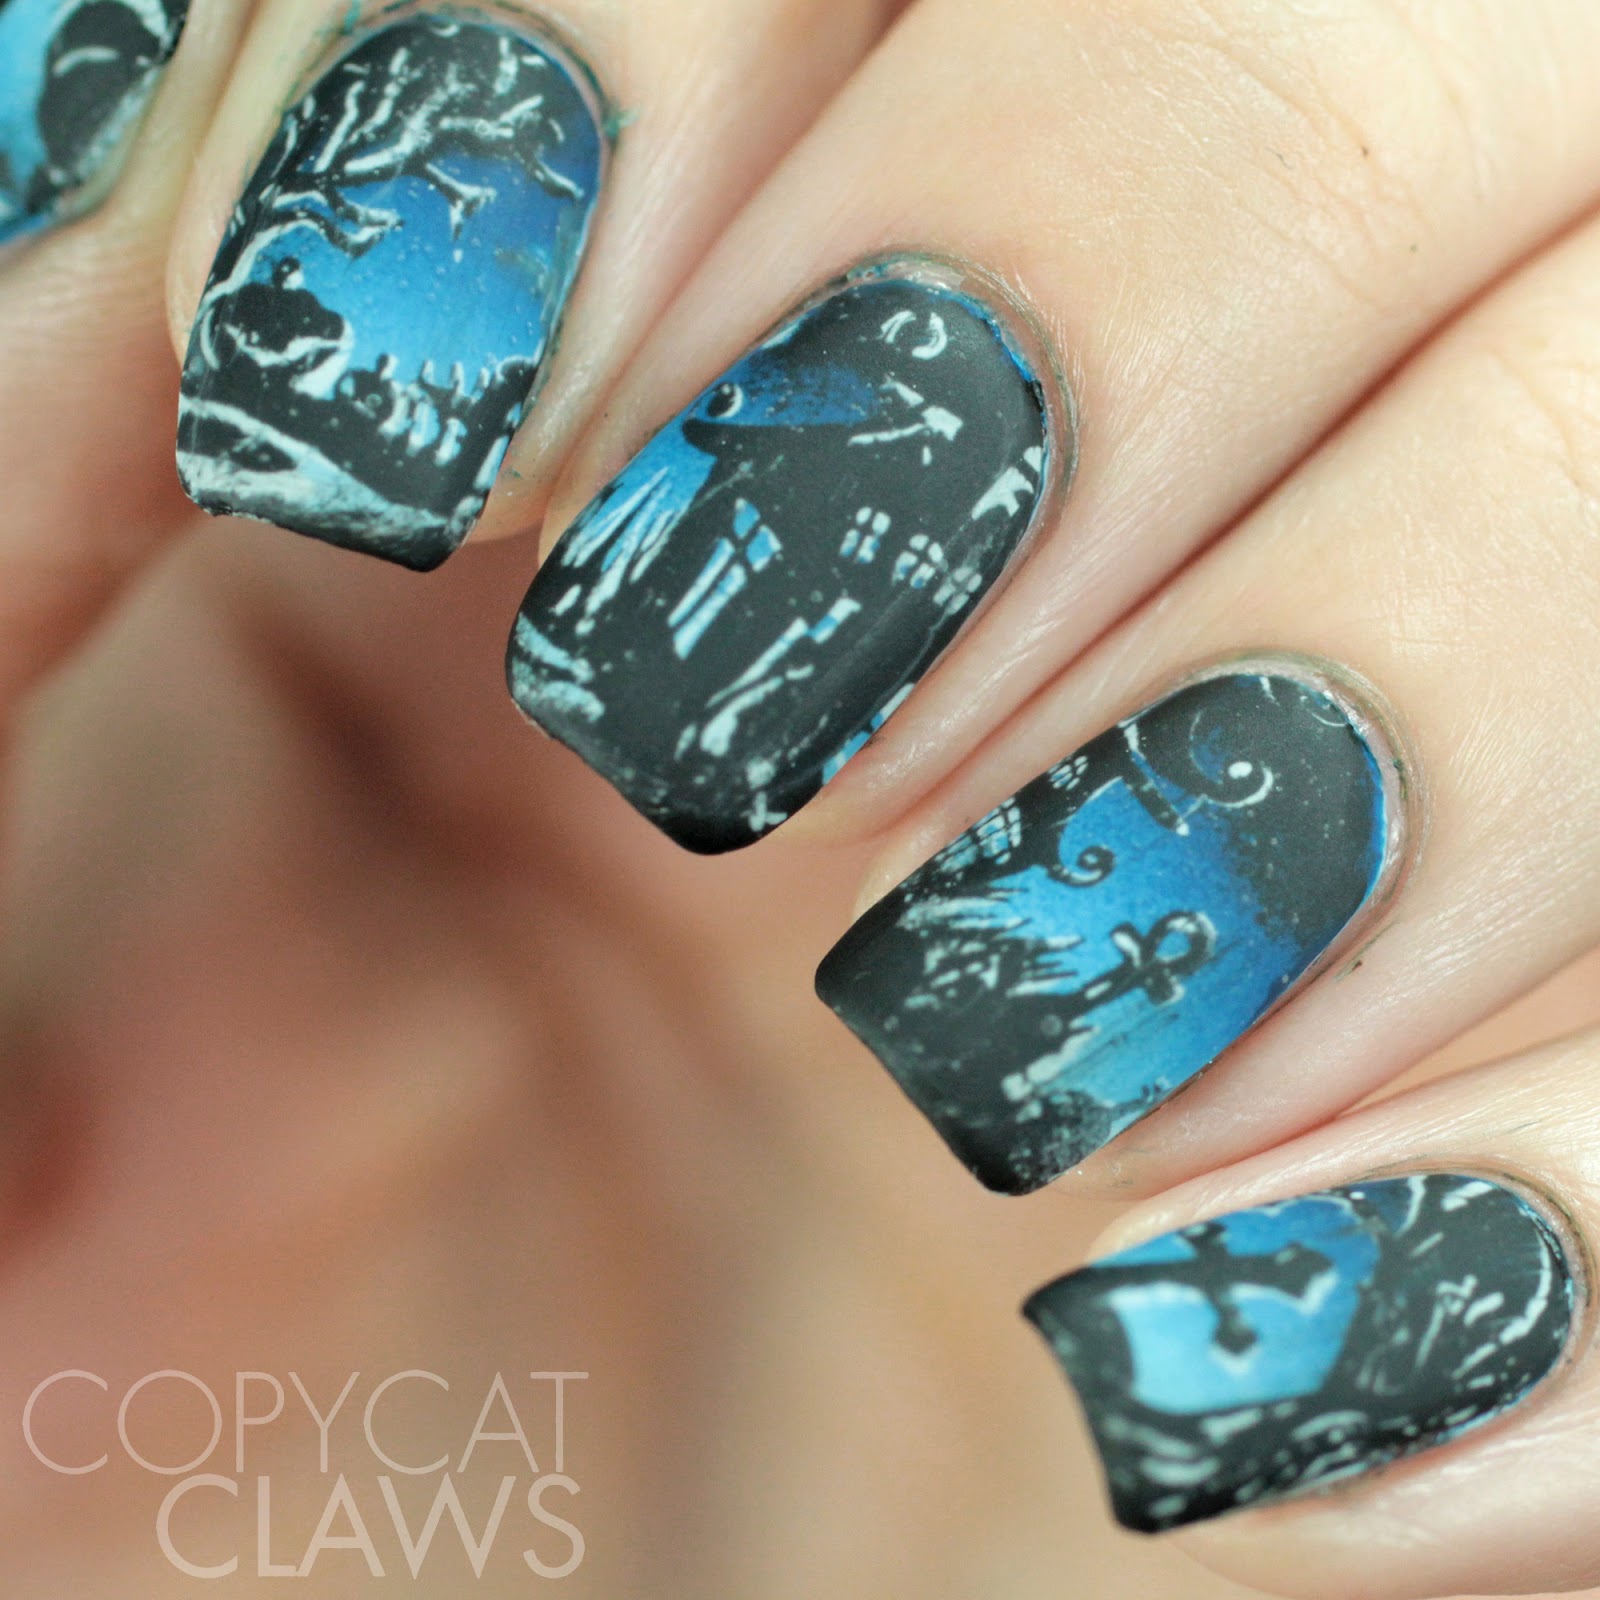 Copycat Claws: Whats Up Nails A012 and B023 Halloween ...